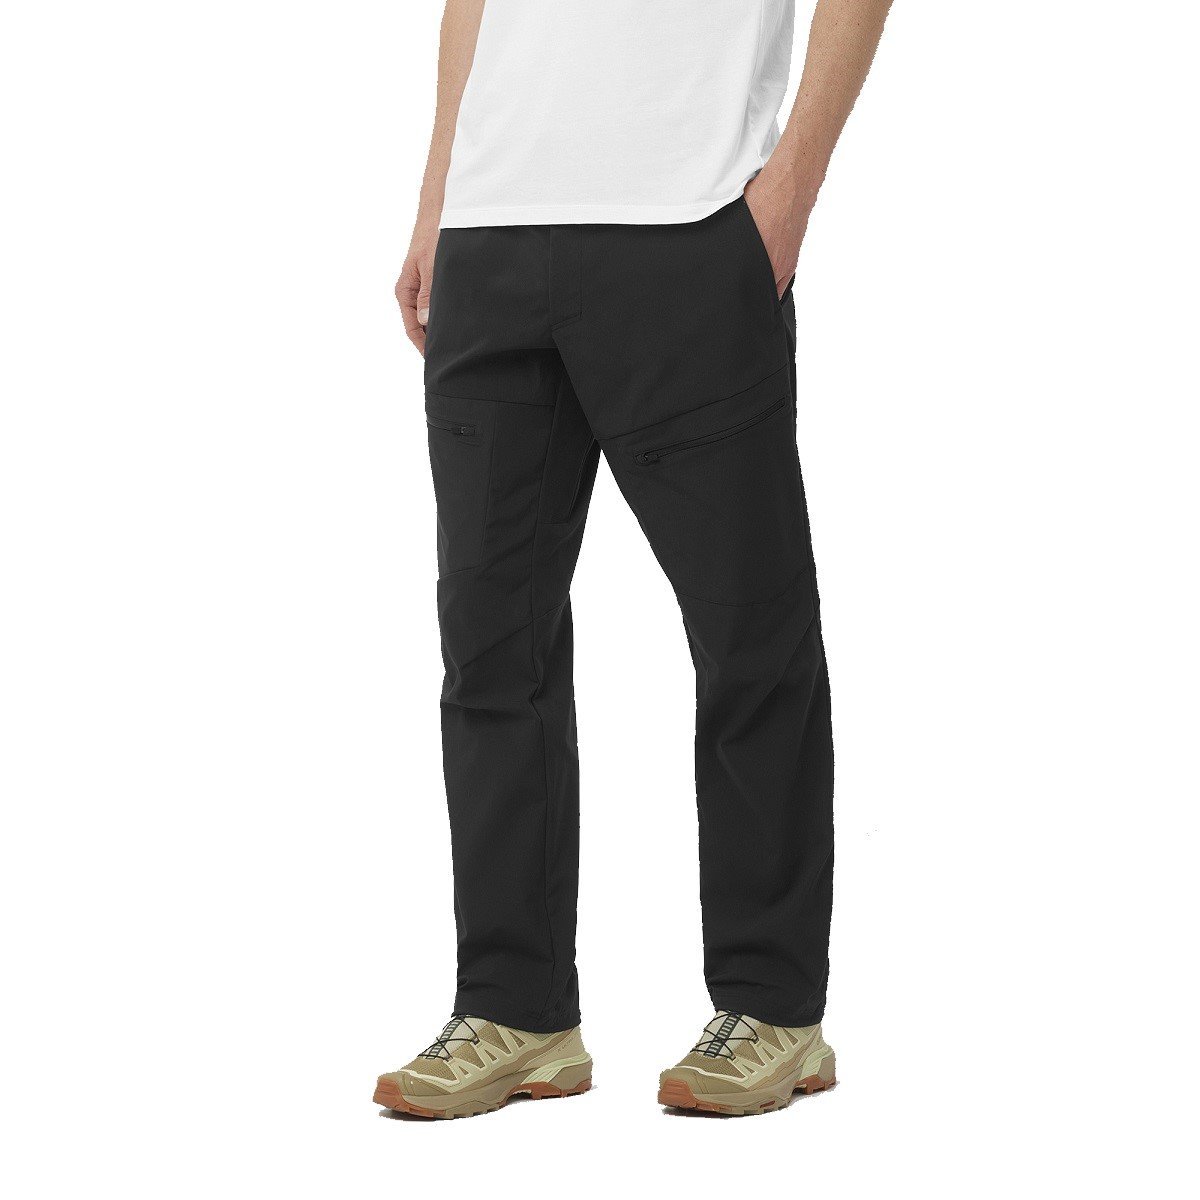 LC2212200_0_MOD_outerpathutilitypants_deepblack_outdoor_m.png.high-res